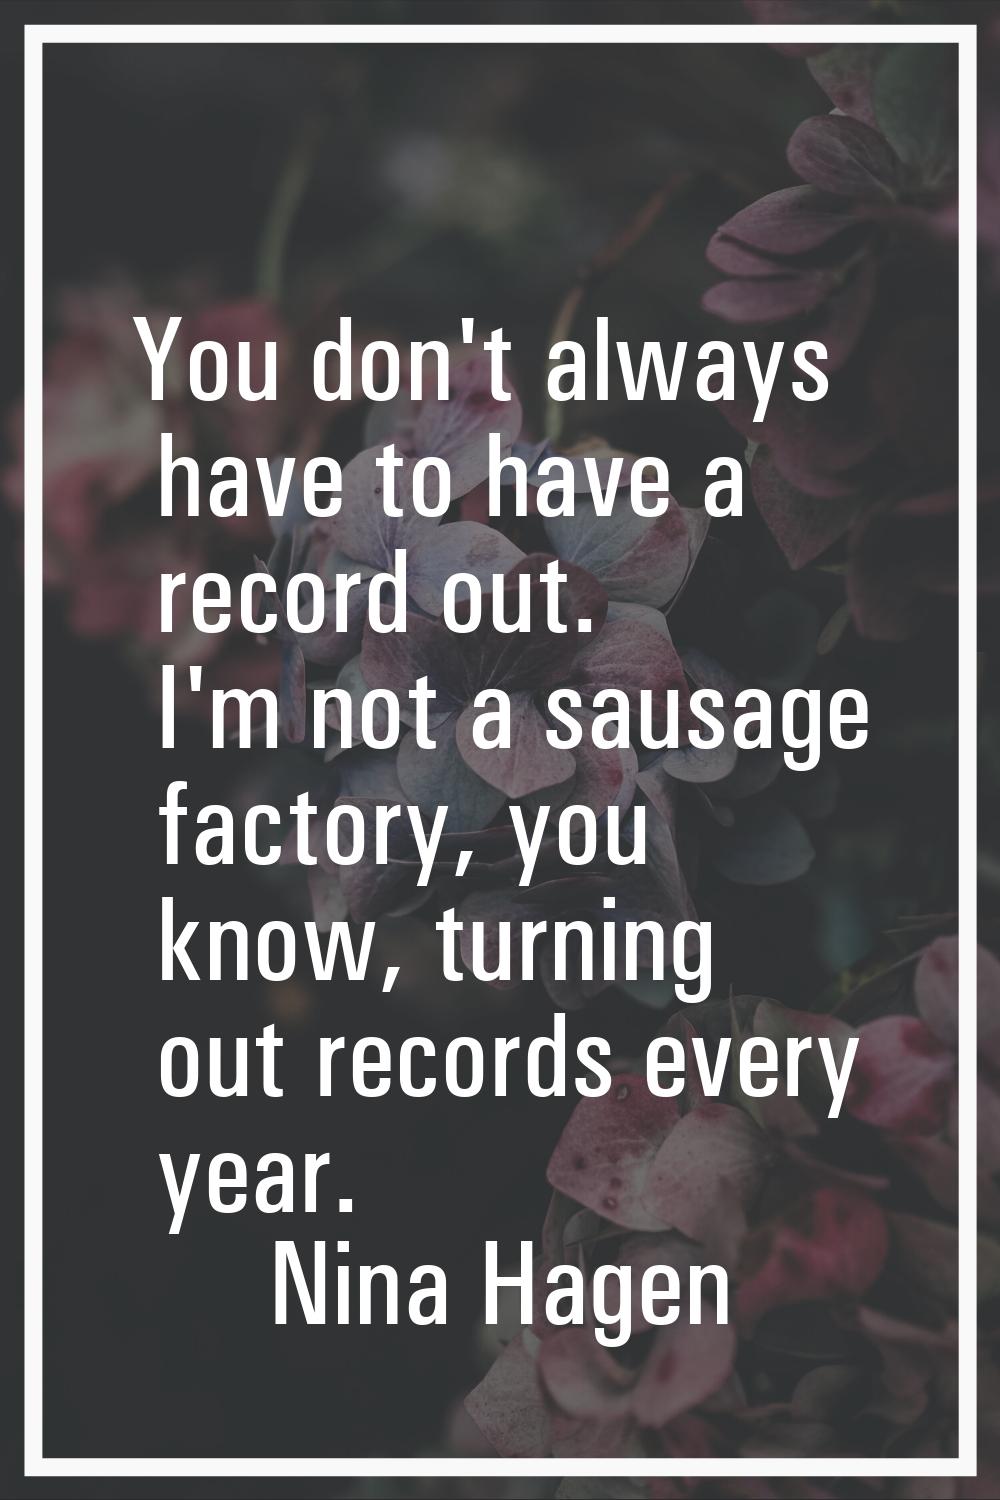 You don't always have to have a record out. I'm not a sausage factory, you know, turning out record